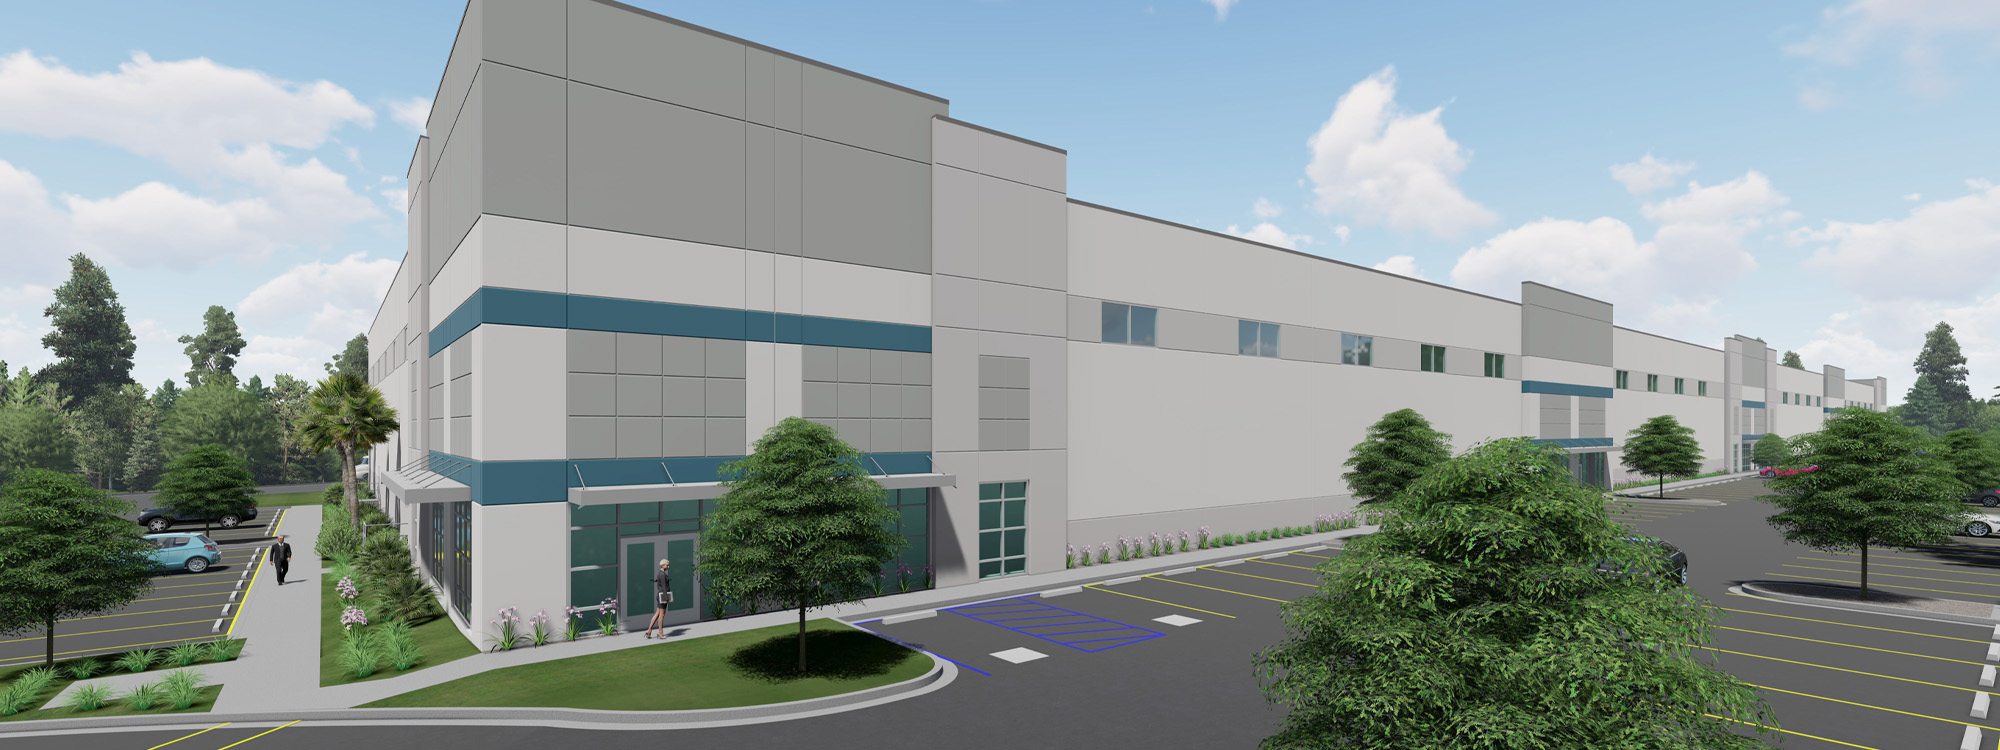 Clements Ferry Logistics Center - 163,800 SF of industrial space available for lease in Charleston, South Carolina.